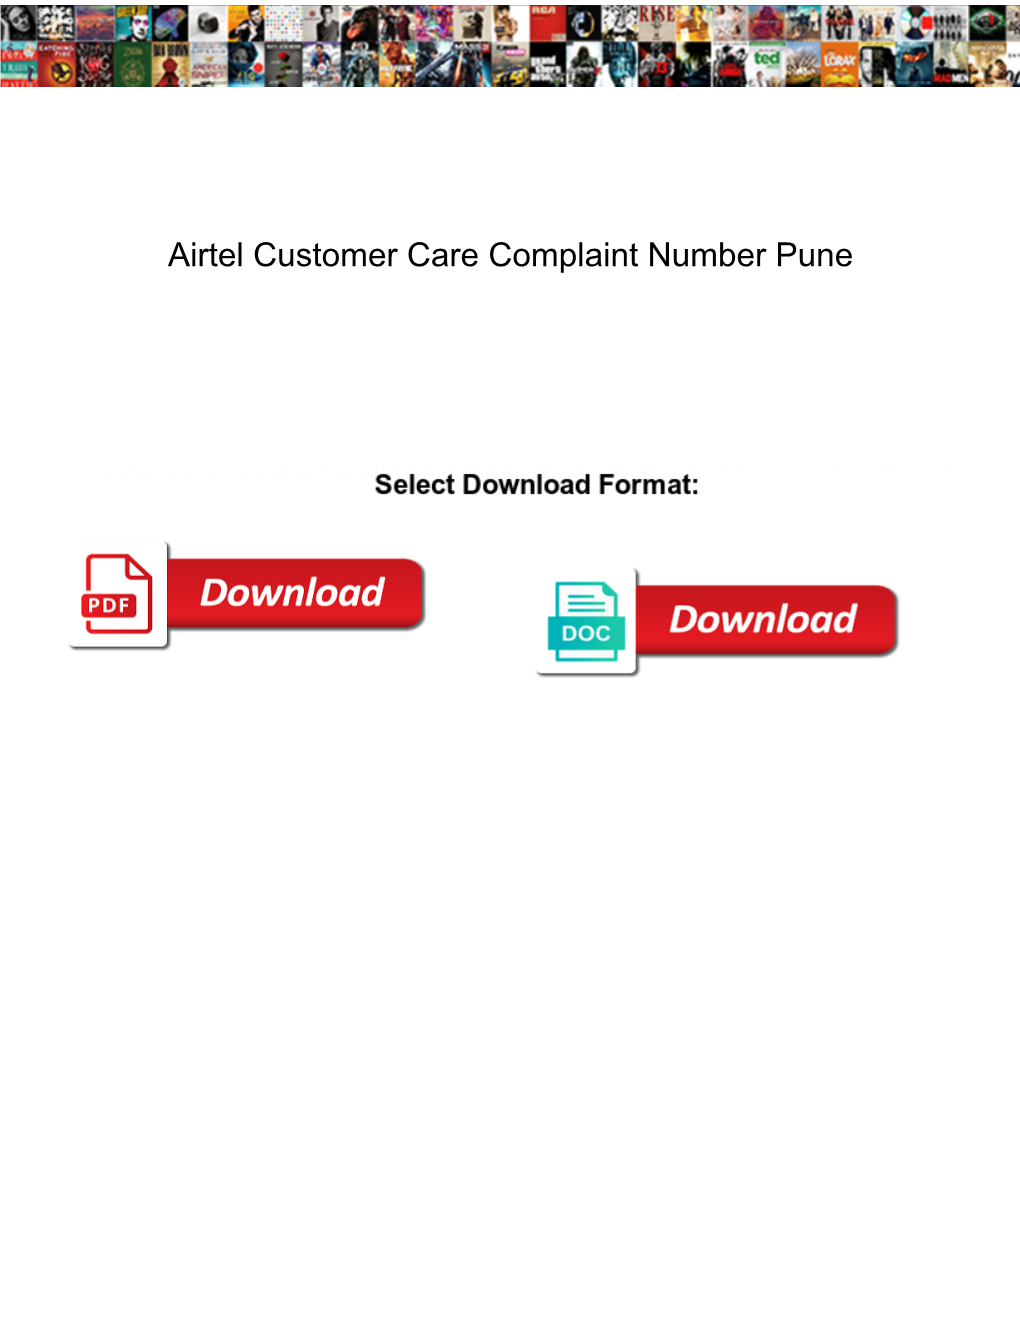 Airtel Customer Care Complaint Number Pune